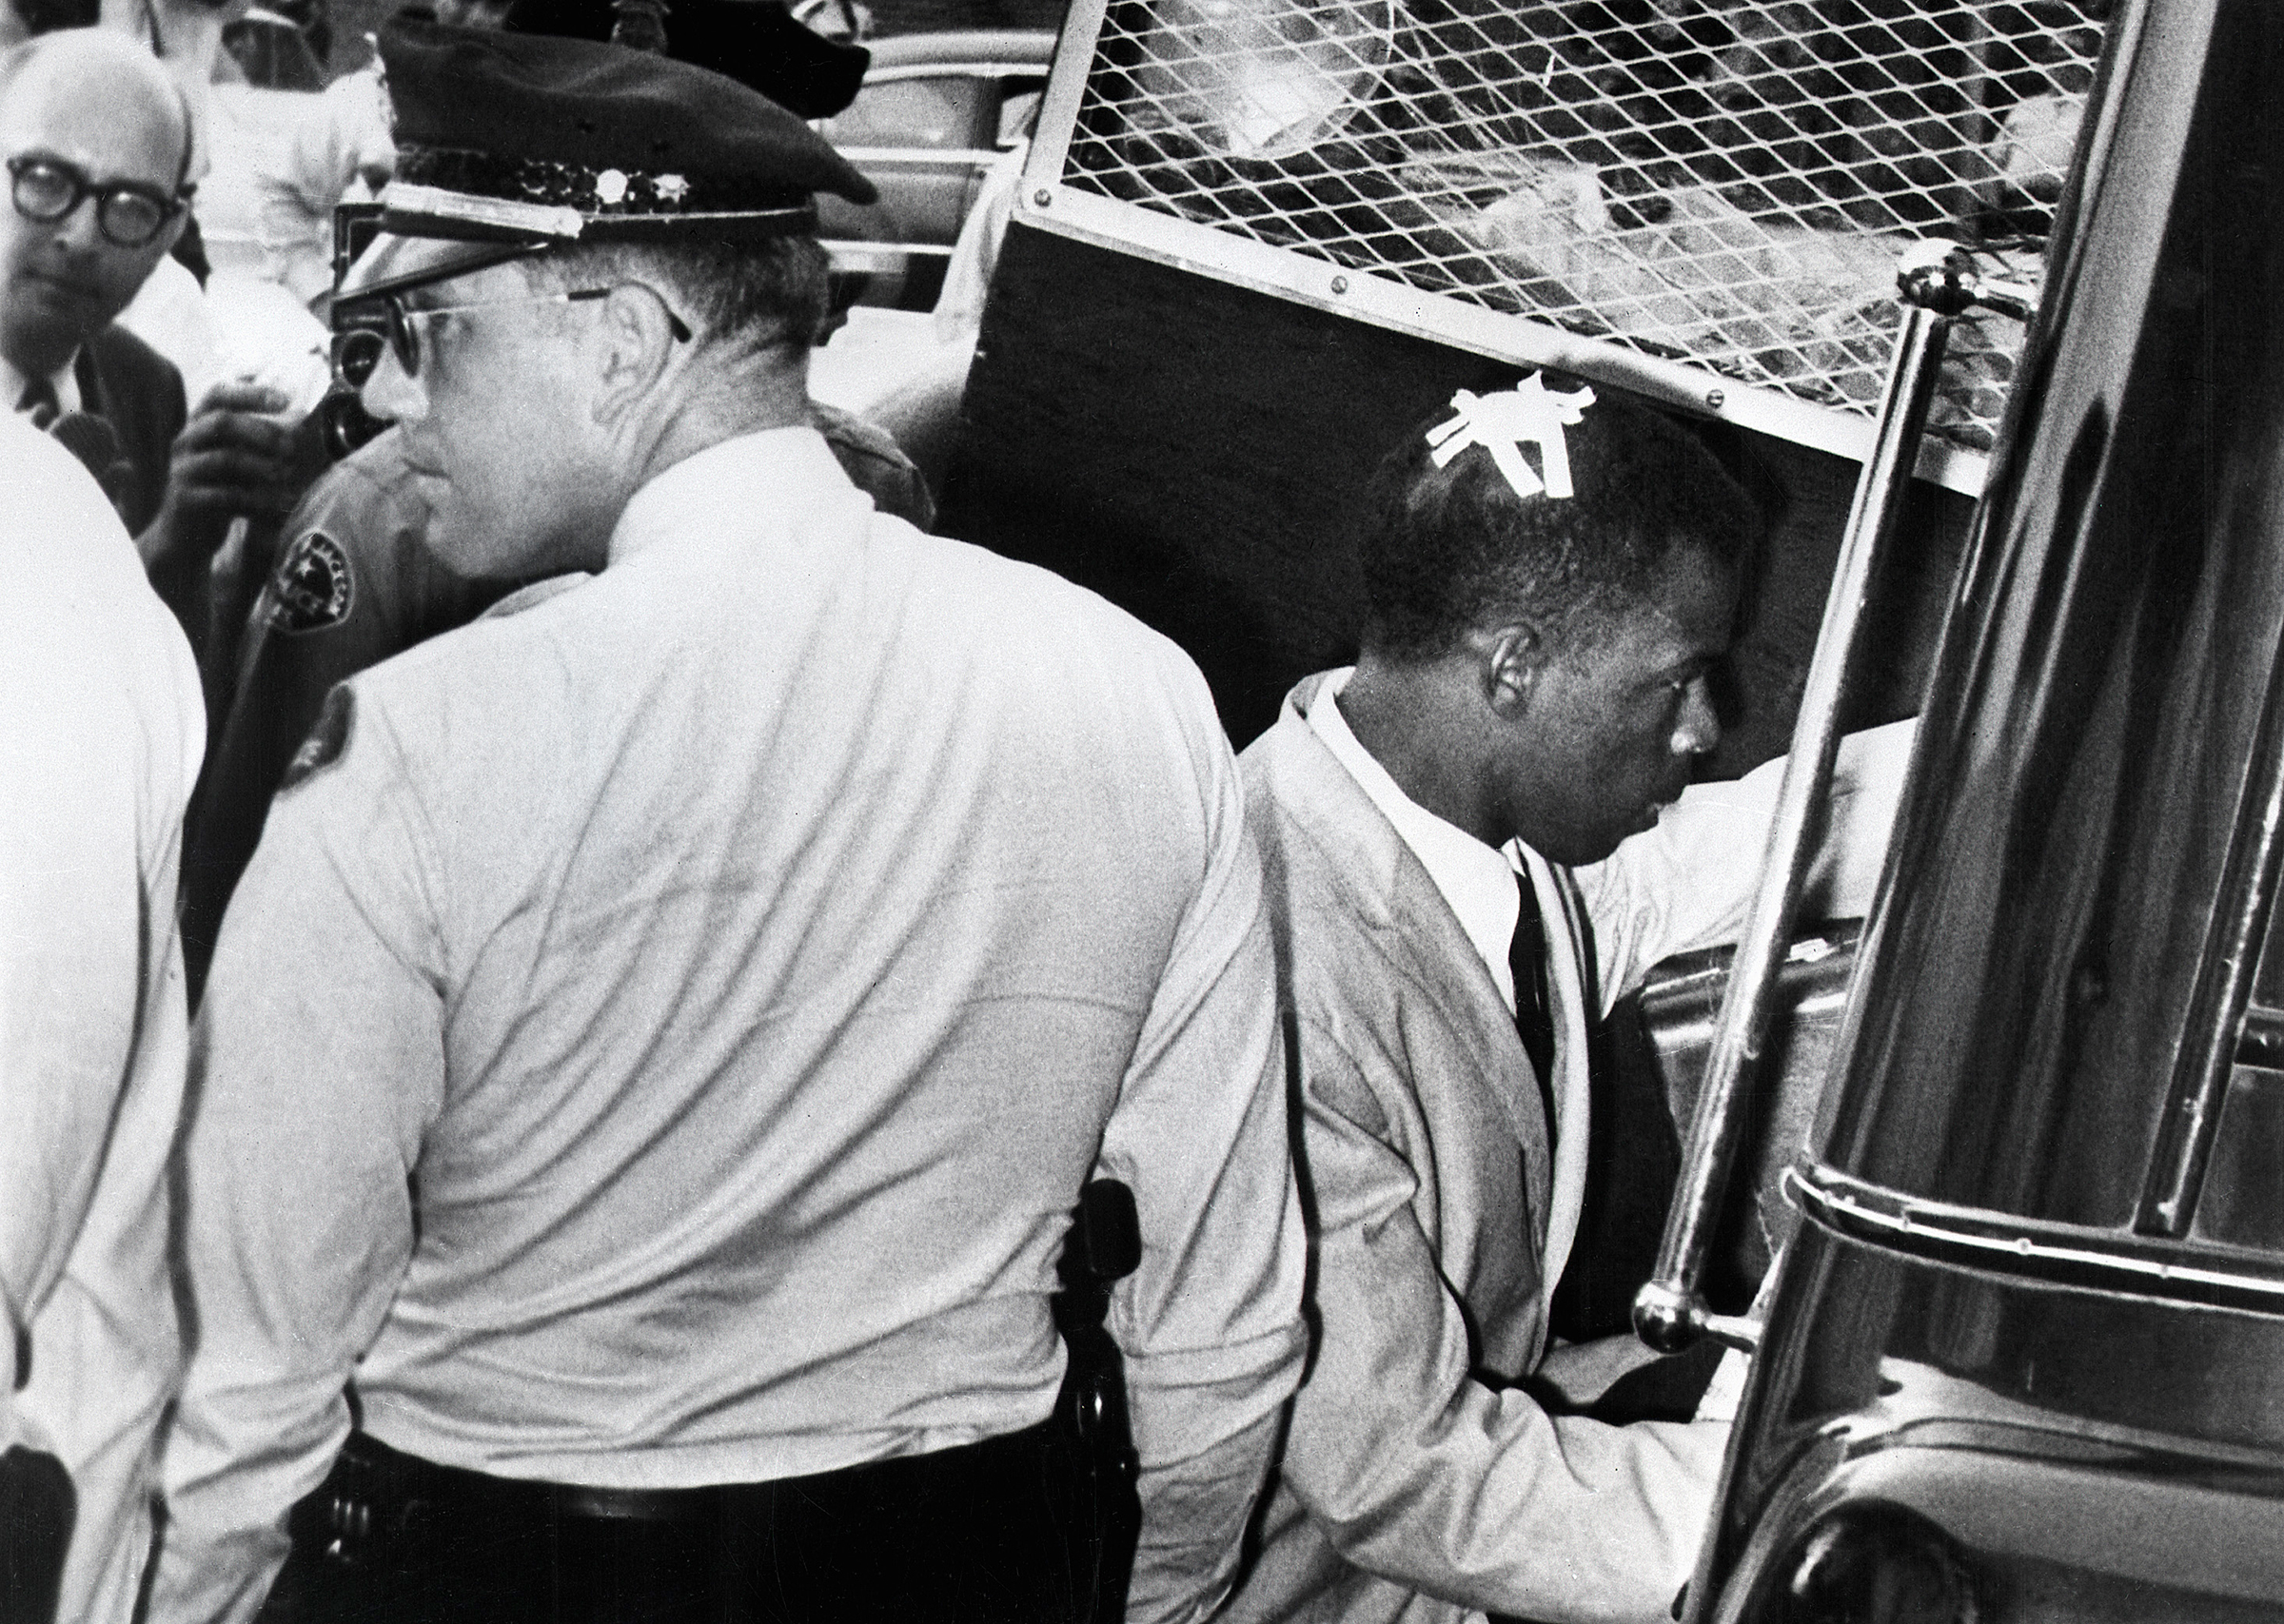 With an "X" made of tape still on his head, marking the spot where he was struck in Montgomery, Ala., John Lewis enters a police van after his arrest in Jackson, Mississippi in May 1961.